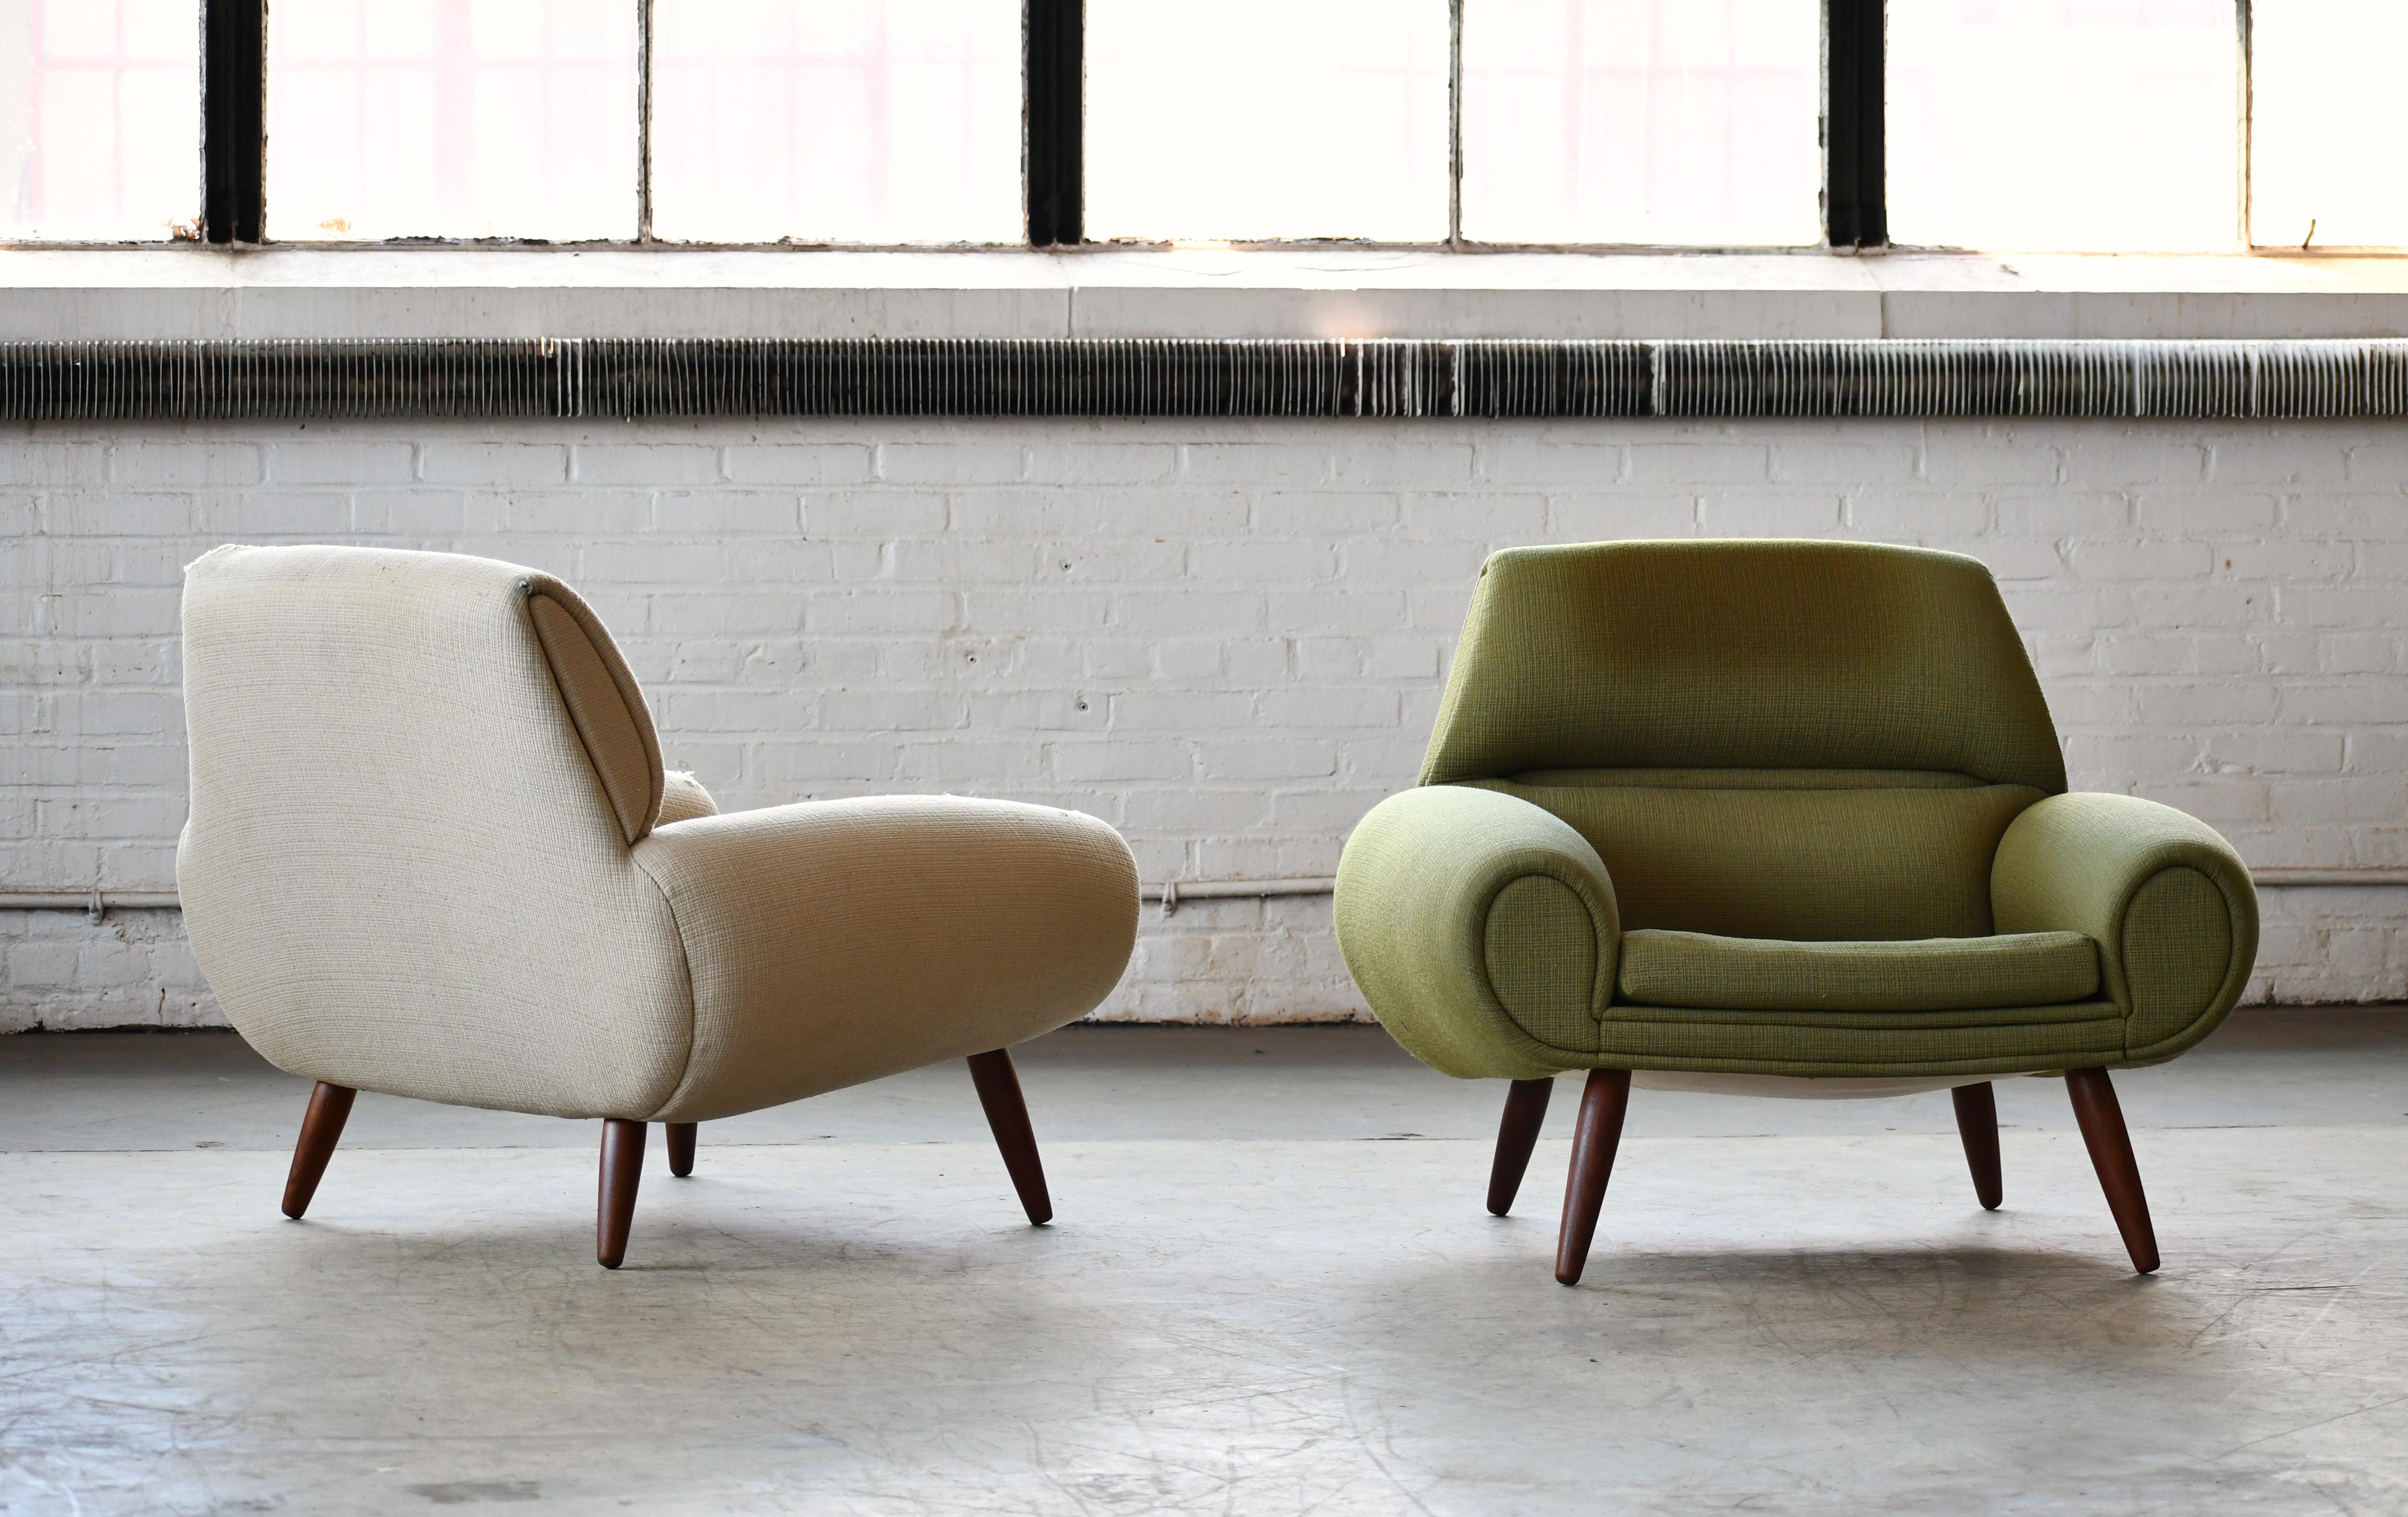 Amazing set of Danish lounge chairs with low and sleek organic design lines and just the epitome of the best the Danish designers of the 1960s had to offer. Some of these fantastic designs of the late 1960s were in many ways the last hooray for